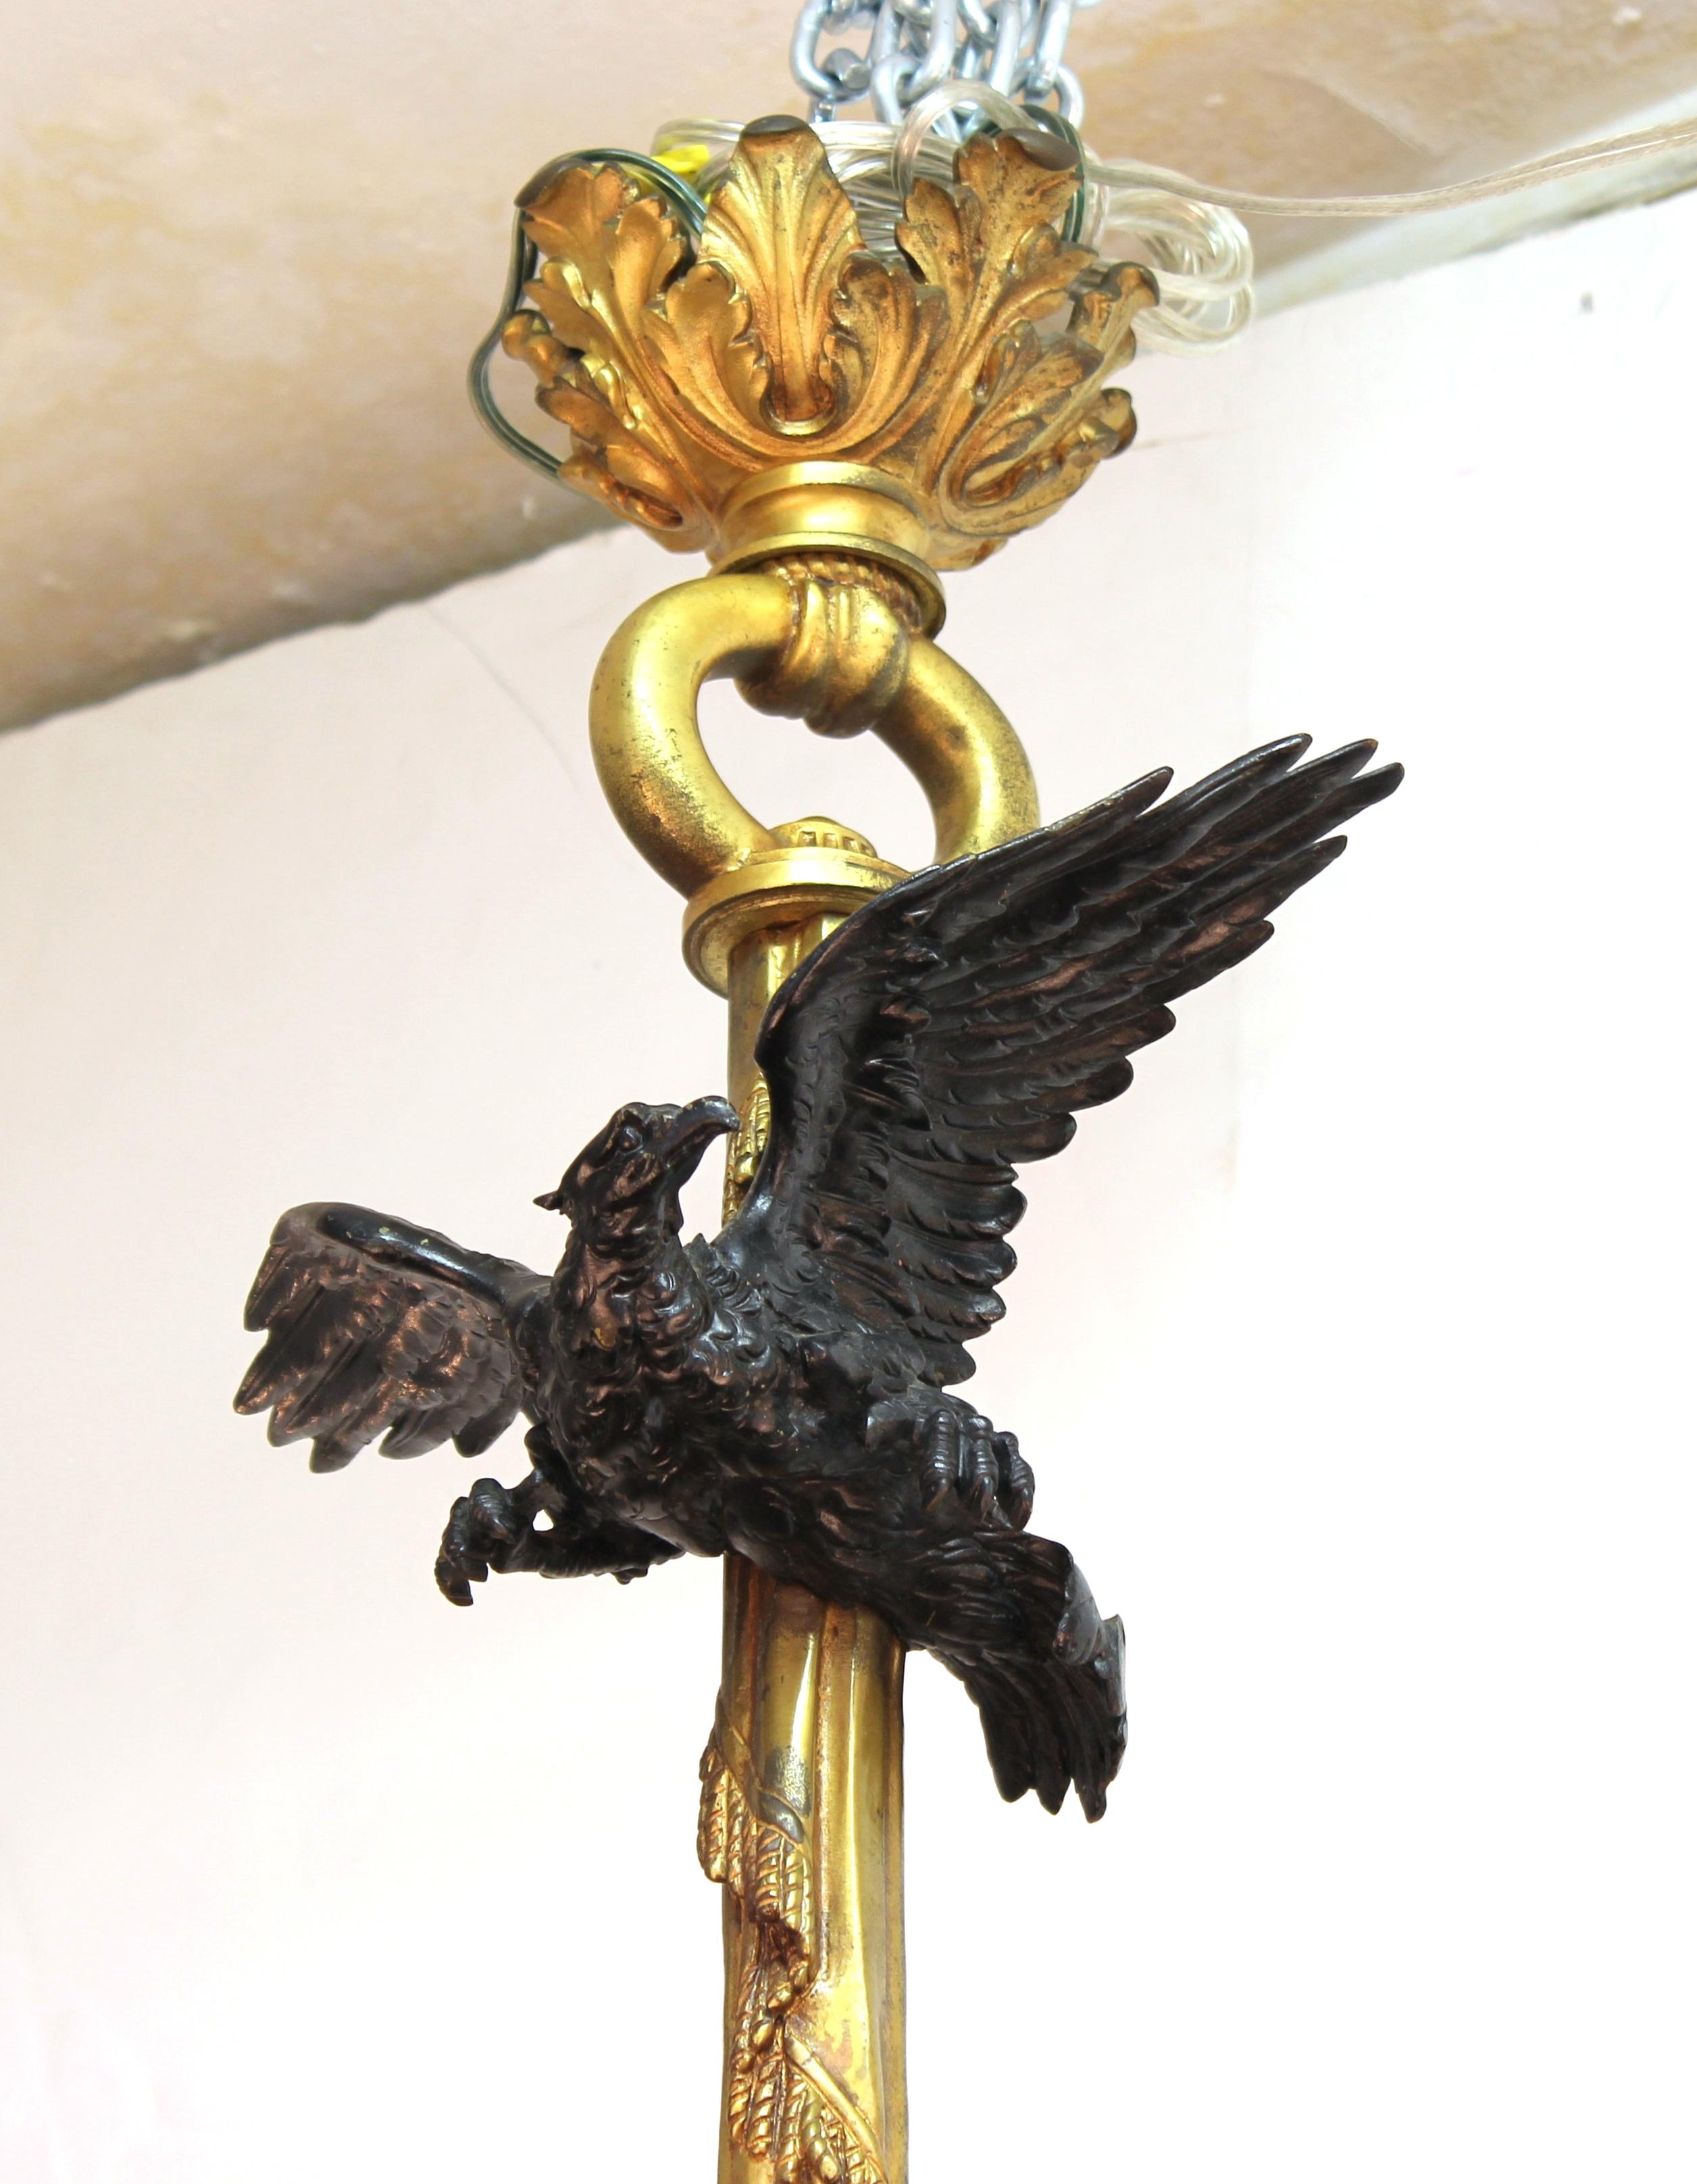 French 19th century Historicist bronze chandelier with an elaborately detailed flying eagle on the upper part and a putti hanging on to a flower basket out of which the arms of the chandelier emerge. The piece has been rewired and is in great